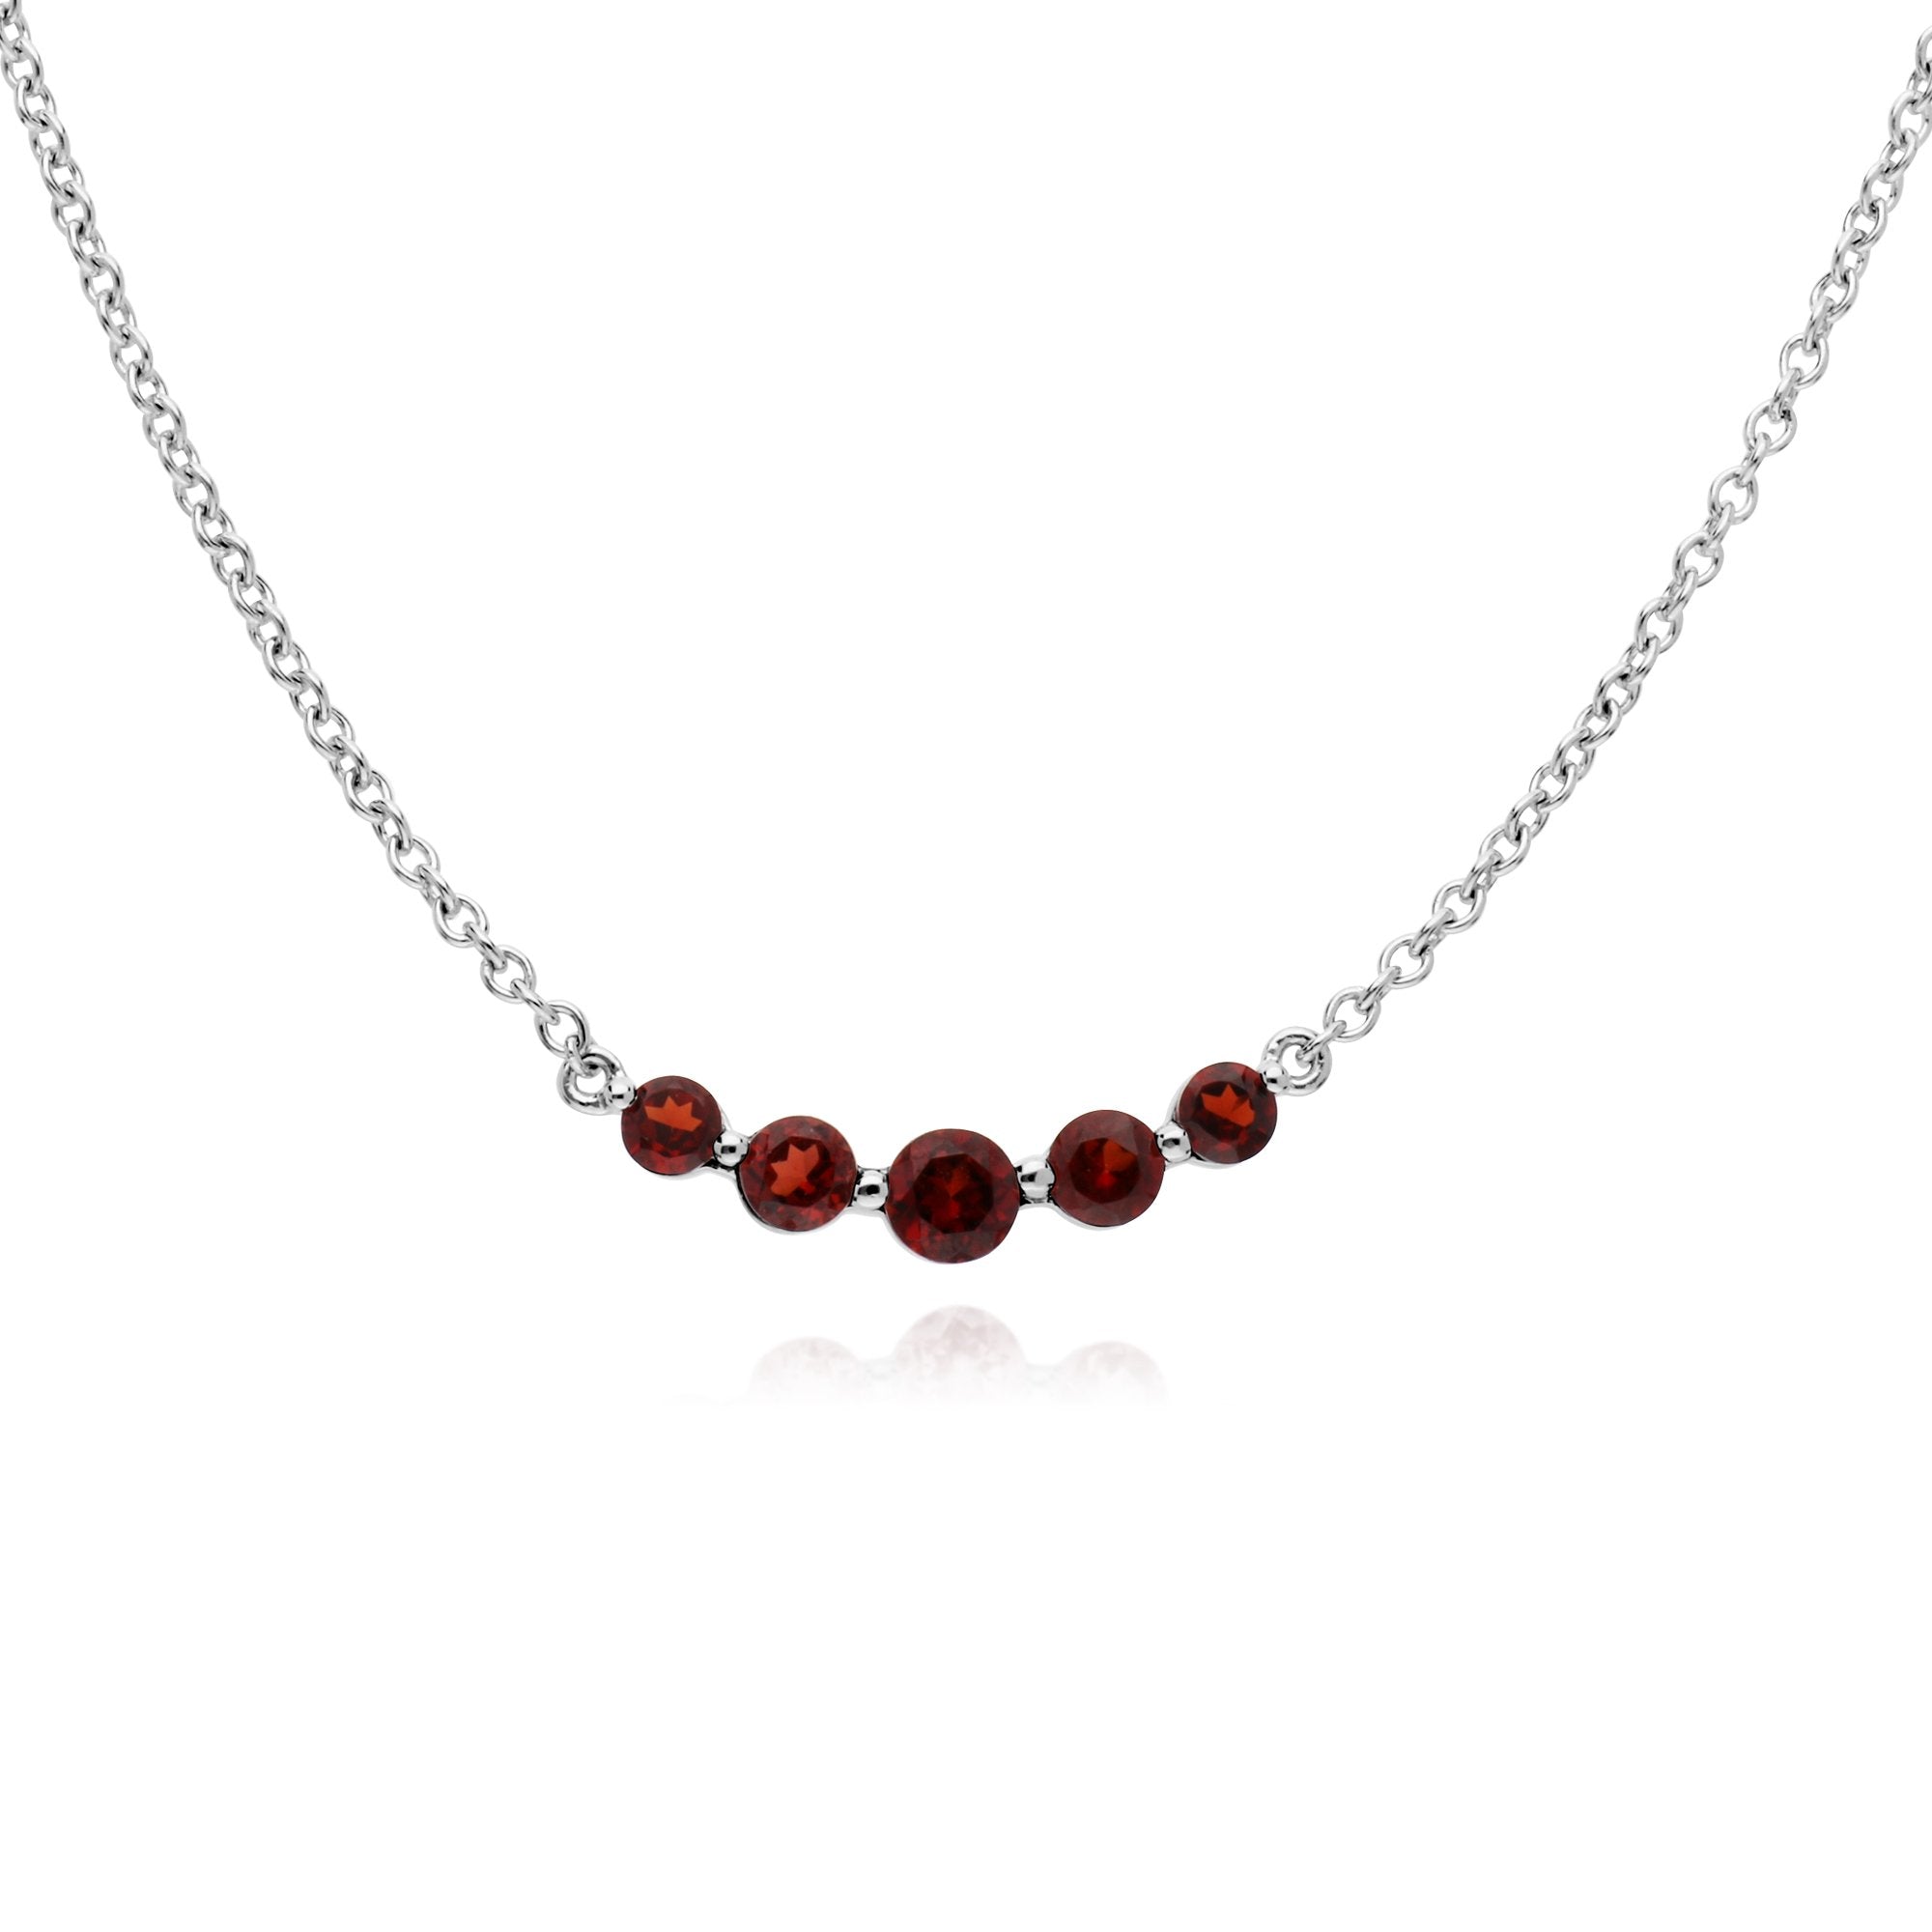 Classic Round Garnet 5 Stone Gradient Necklace in 925 Sterling Silver